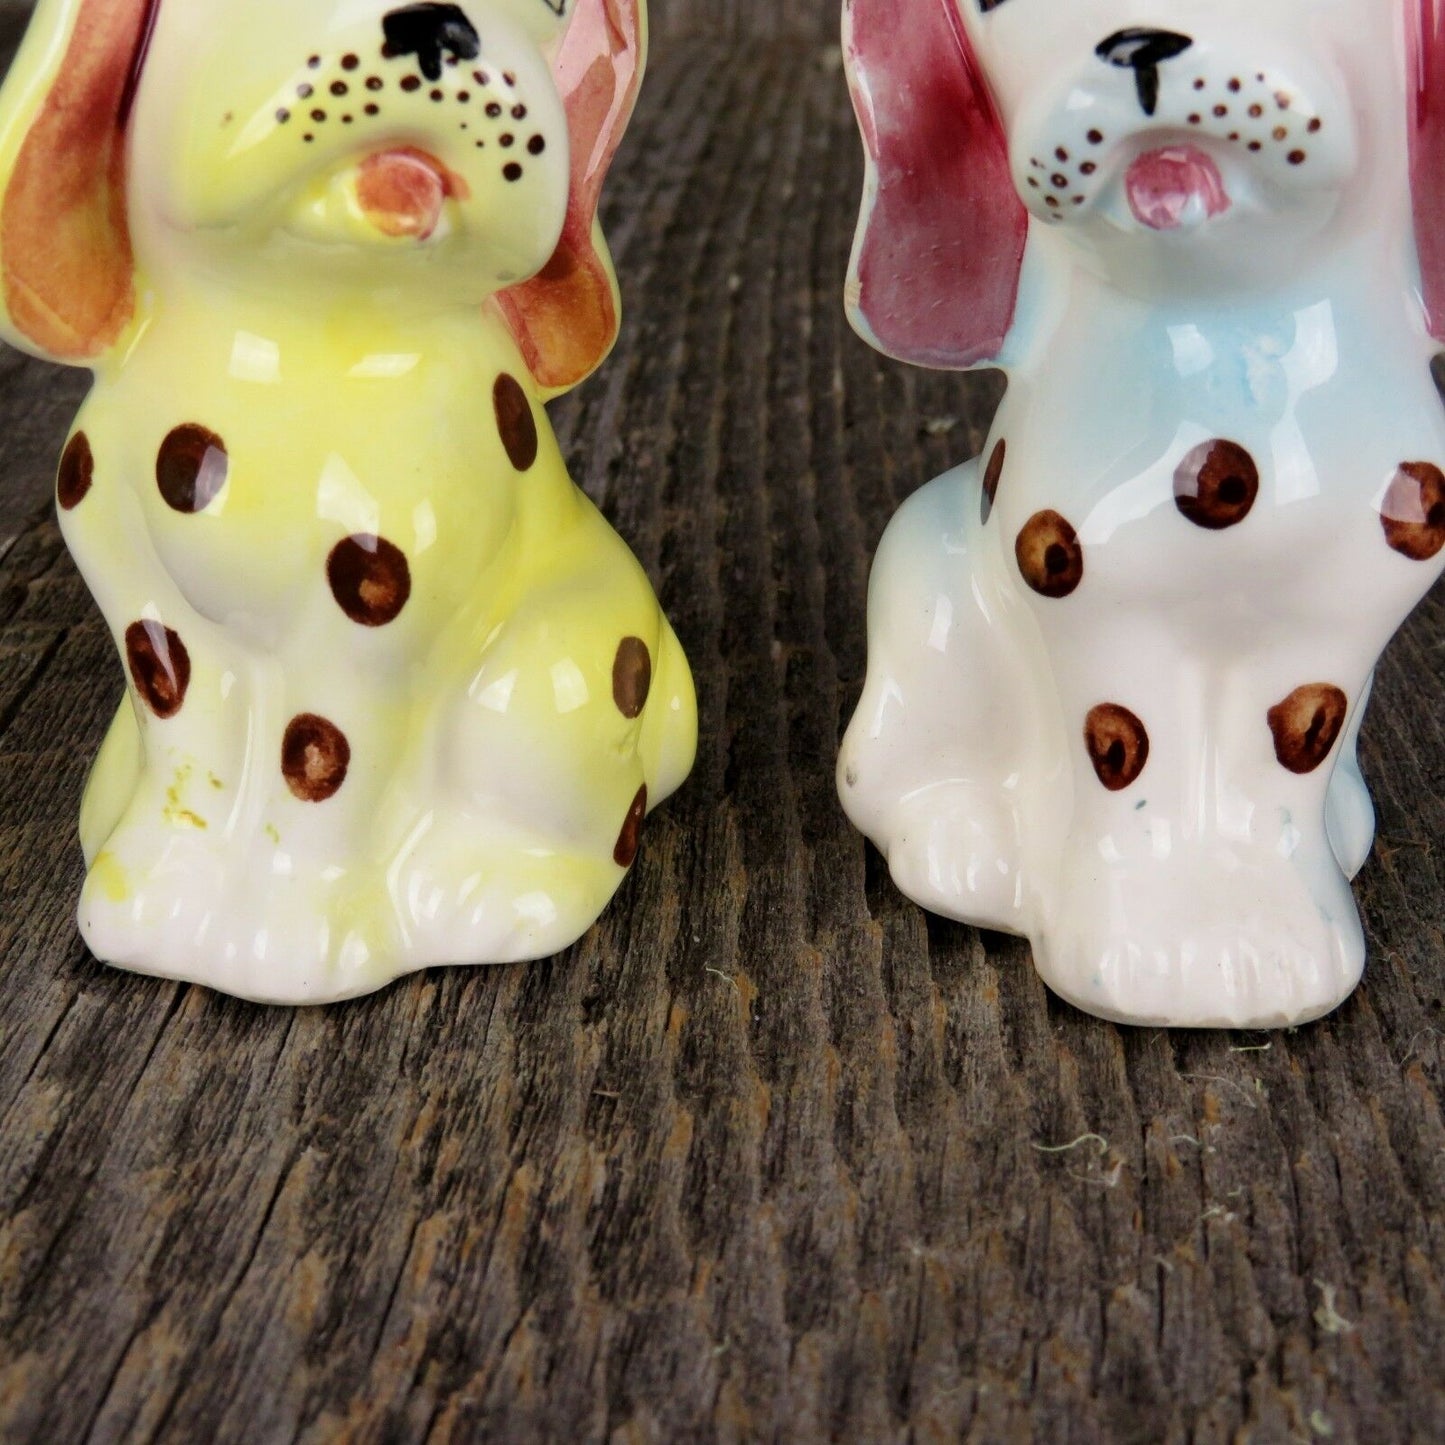 Dog Salt and Pepper Shakers Vintage Porcelain Yellow Blue Spots Japan 1950’s Figurine - At Grandma's Table